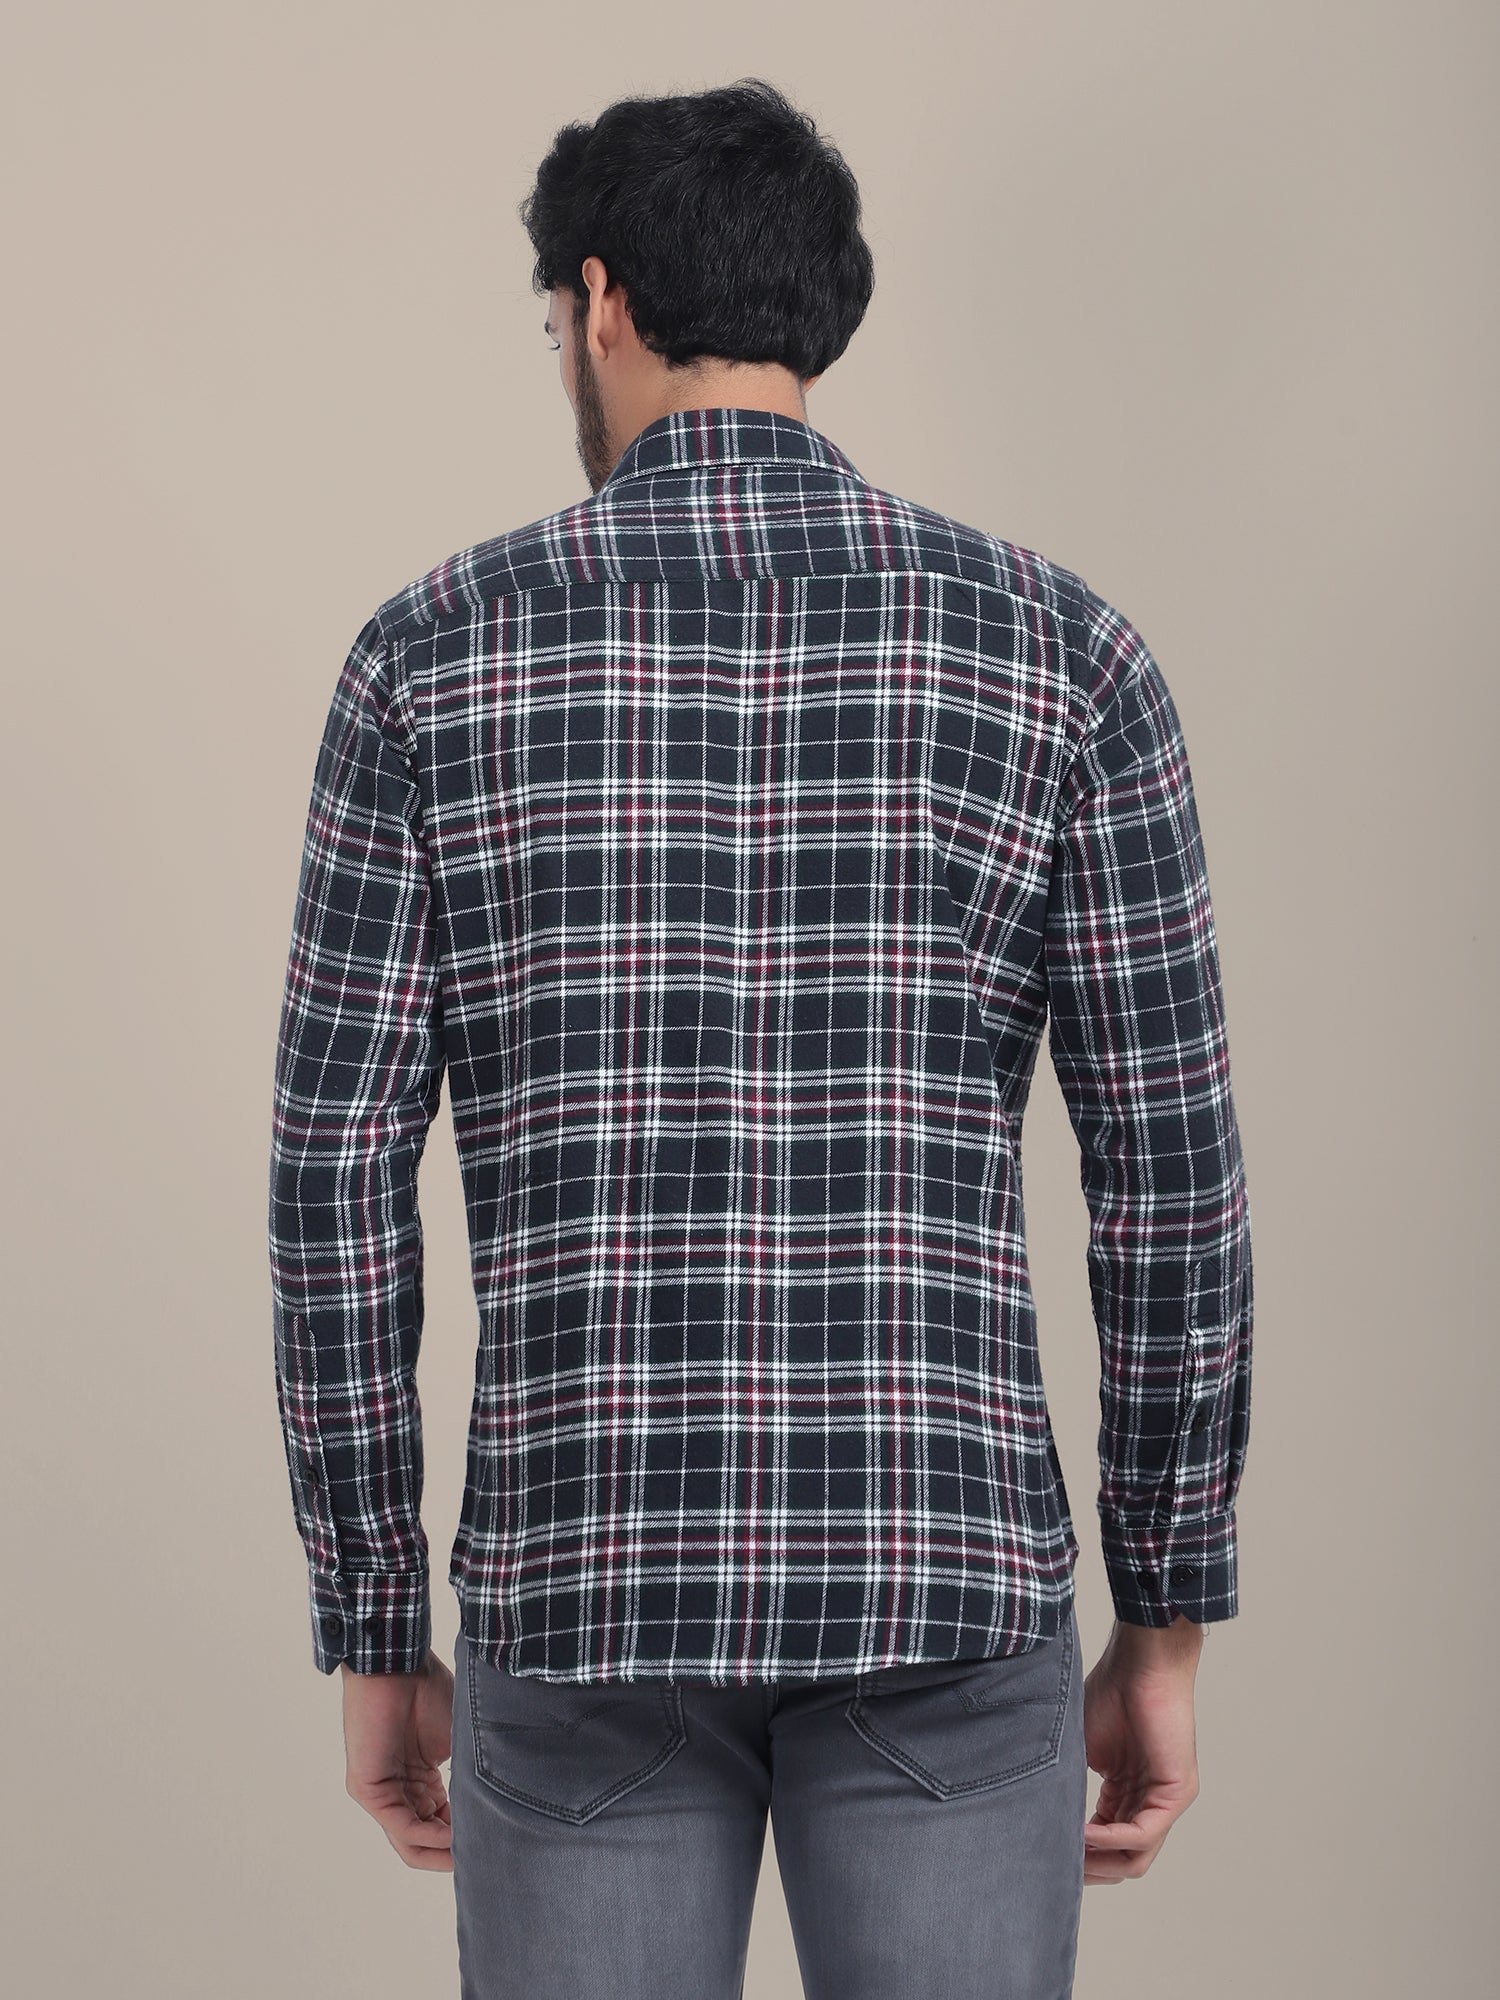 Premium Cotton flannel shirt With Stylish Buttoned Flap Pockets